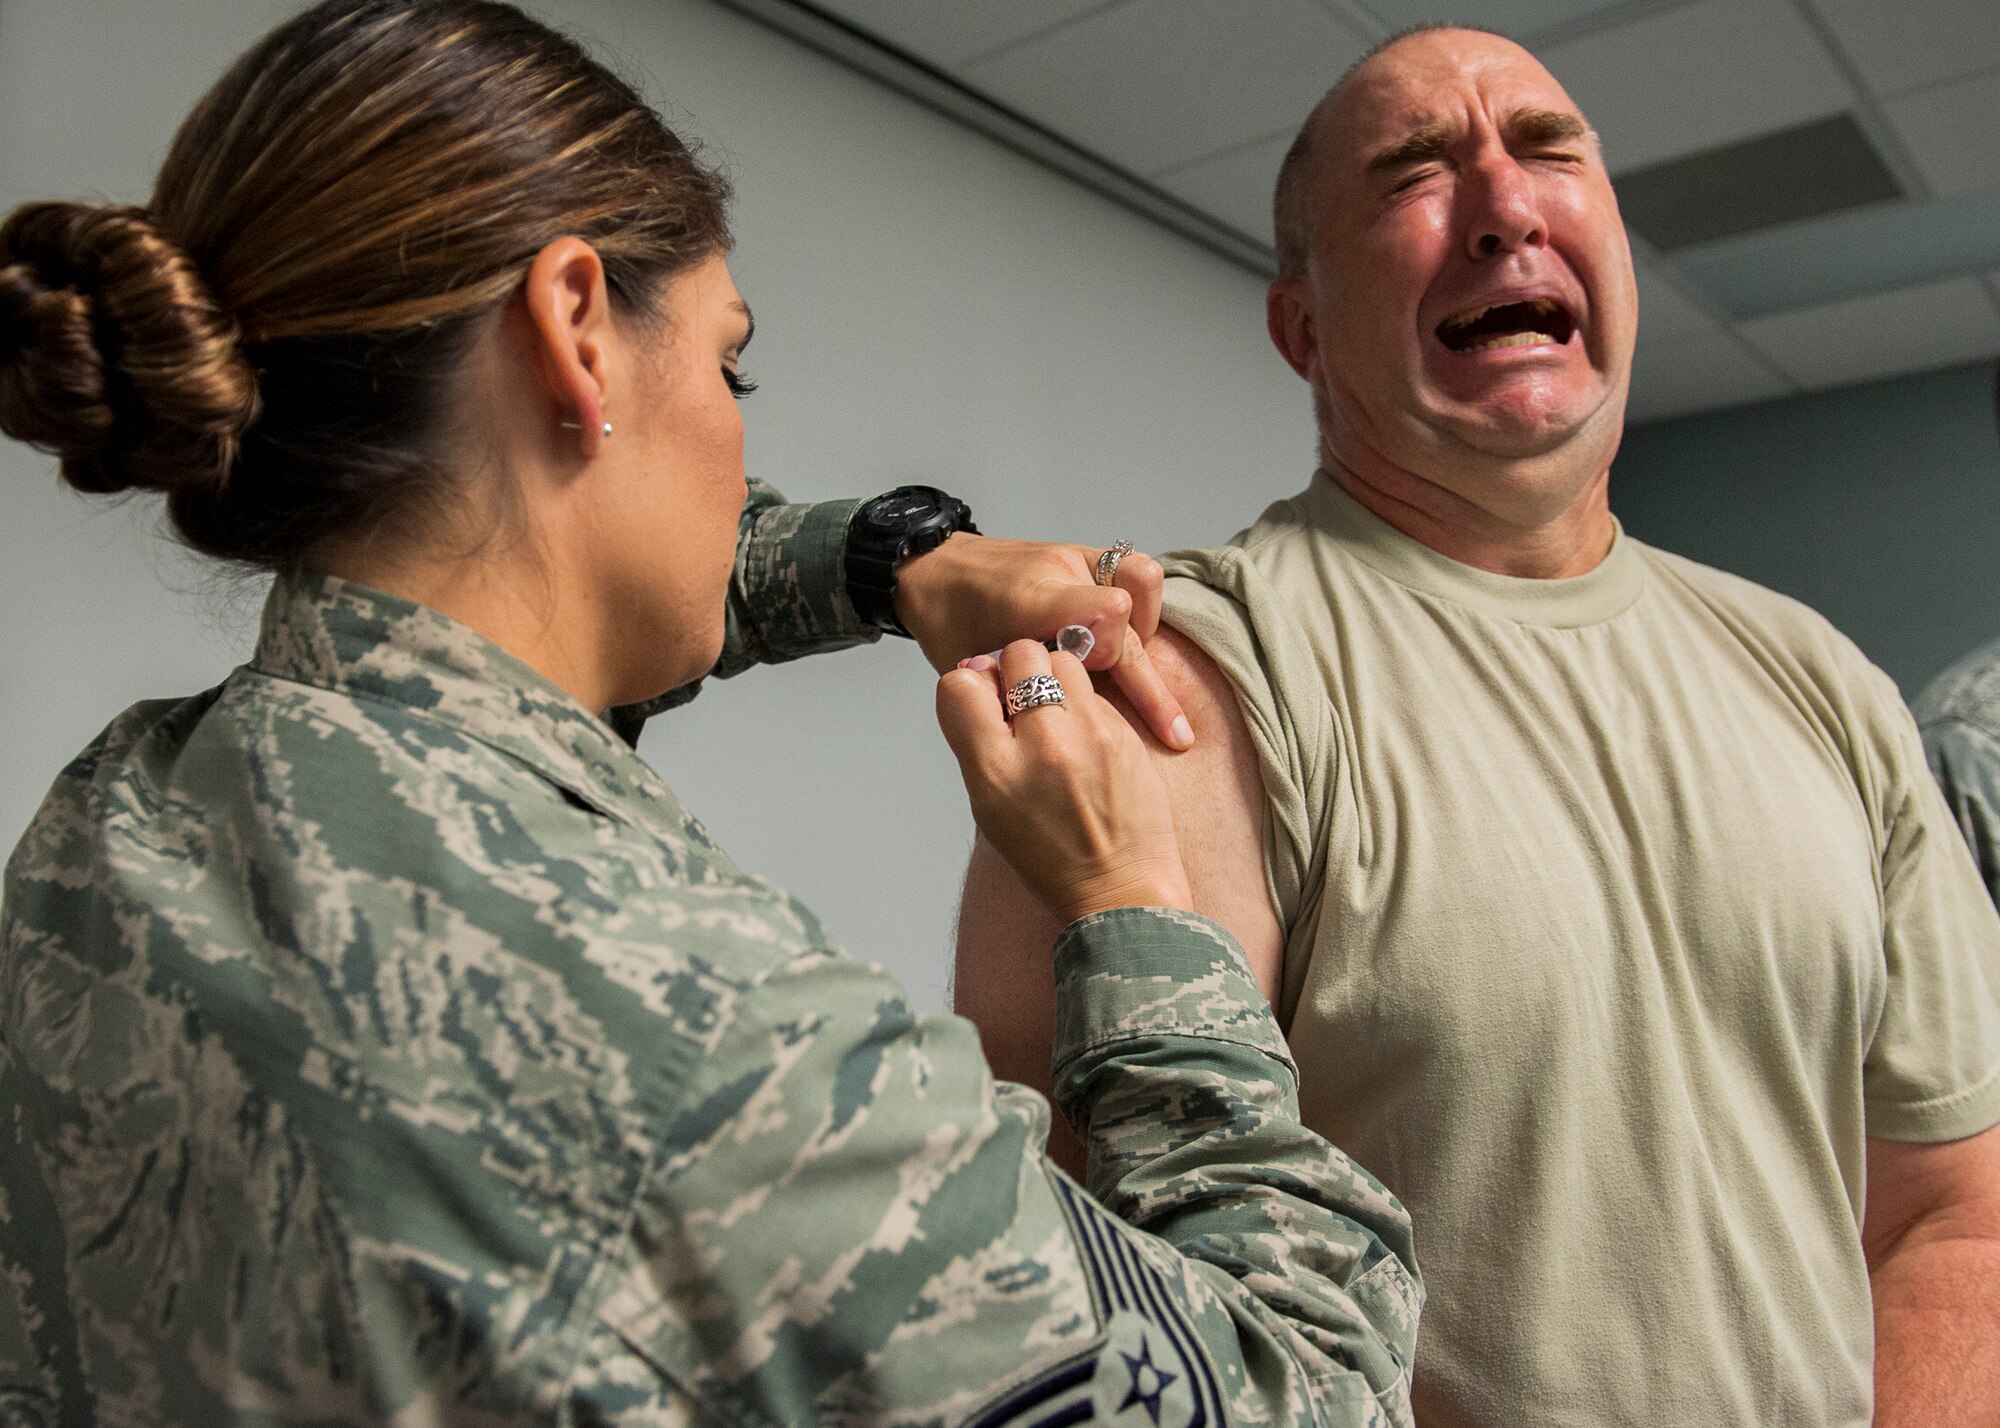 Col. Eric North, 96th Maintenance Group commander, grimaces as he receives a flu vaccination Oct. 8 at Eglin Air Force Base, Fla. A mass influenza vaccine line for active duty only is Oct. 26-29 at building 439 from 7 a.m. to 5 p.m. and Oct. 30 from 7 a.m. to 1 p.m. on a first-come, first-serve basis. The auditorium is located on West F Avenue, across from the library on the East side of the base. Immunization is key to flu prevention and recommended for everyone six-months of age and older.  (U.S. Air Force photo/Ilka Cole)